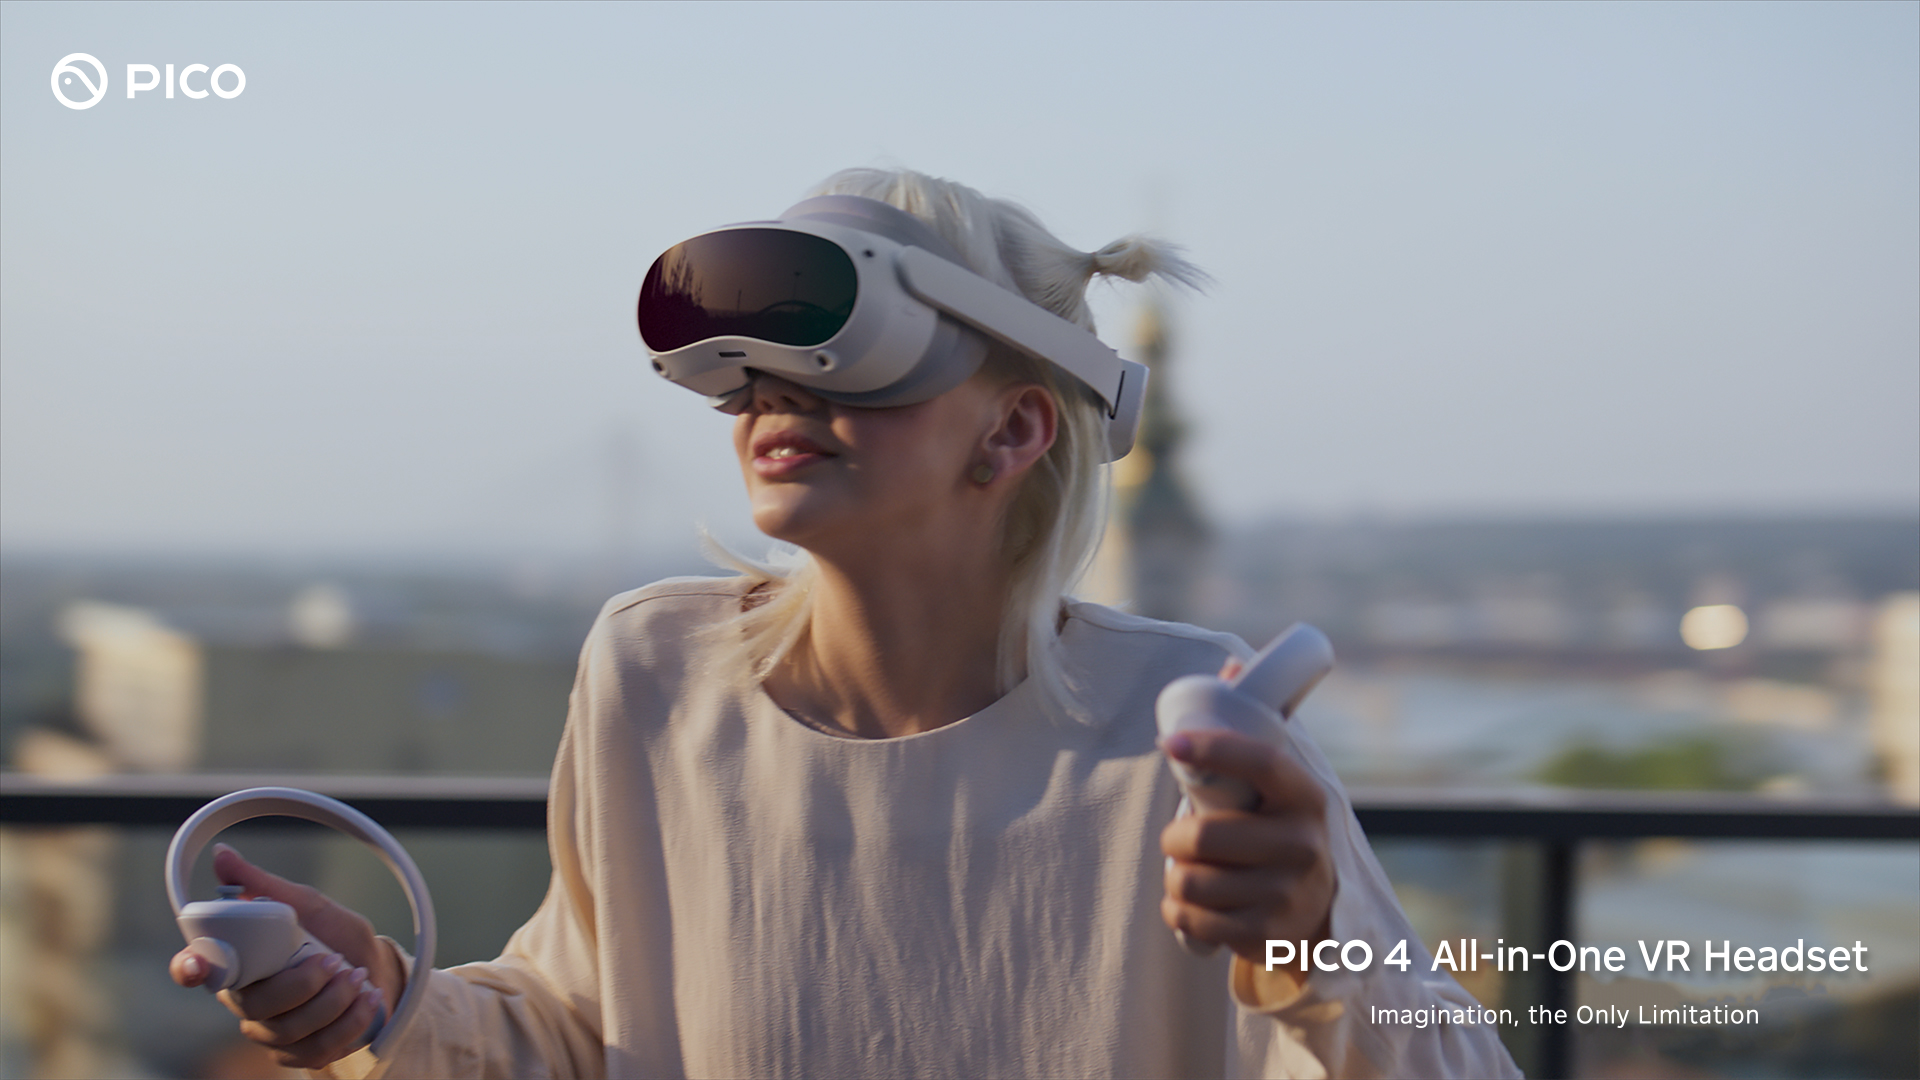 pico 4 all-in-one vr headset